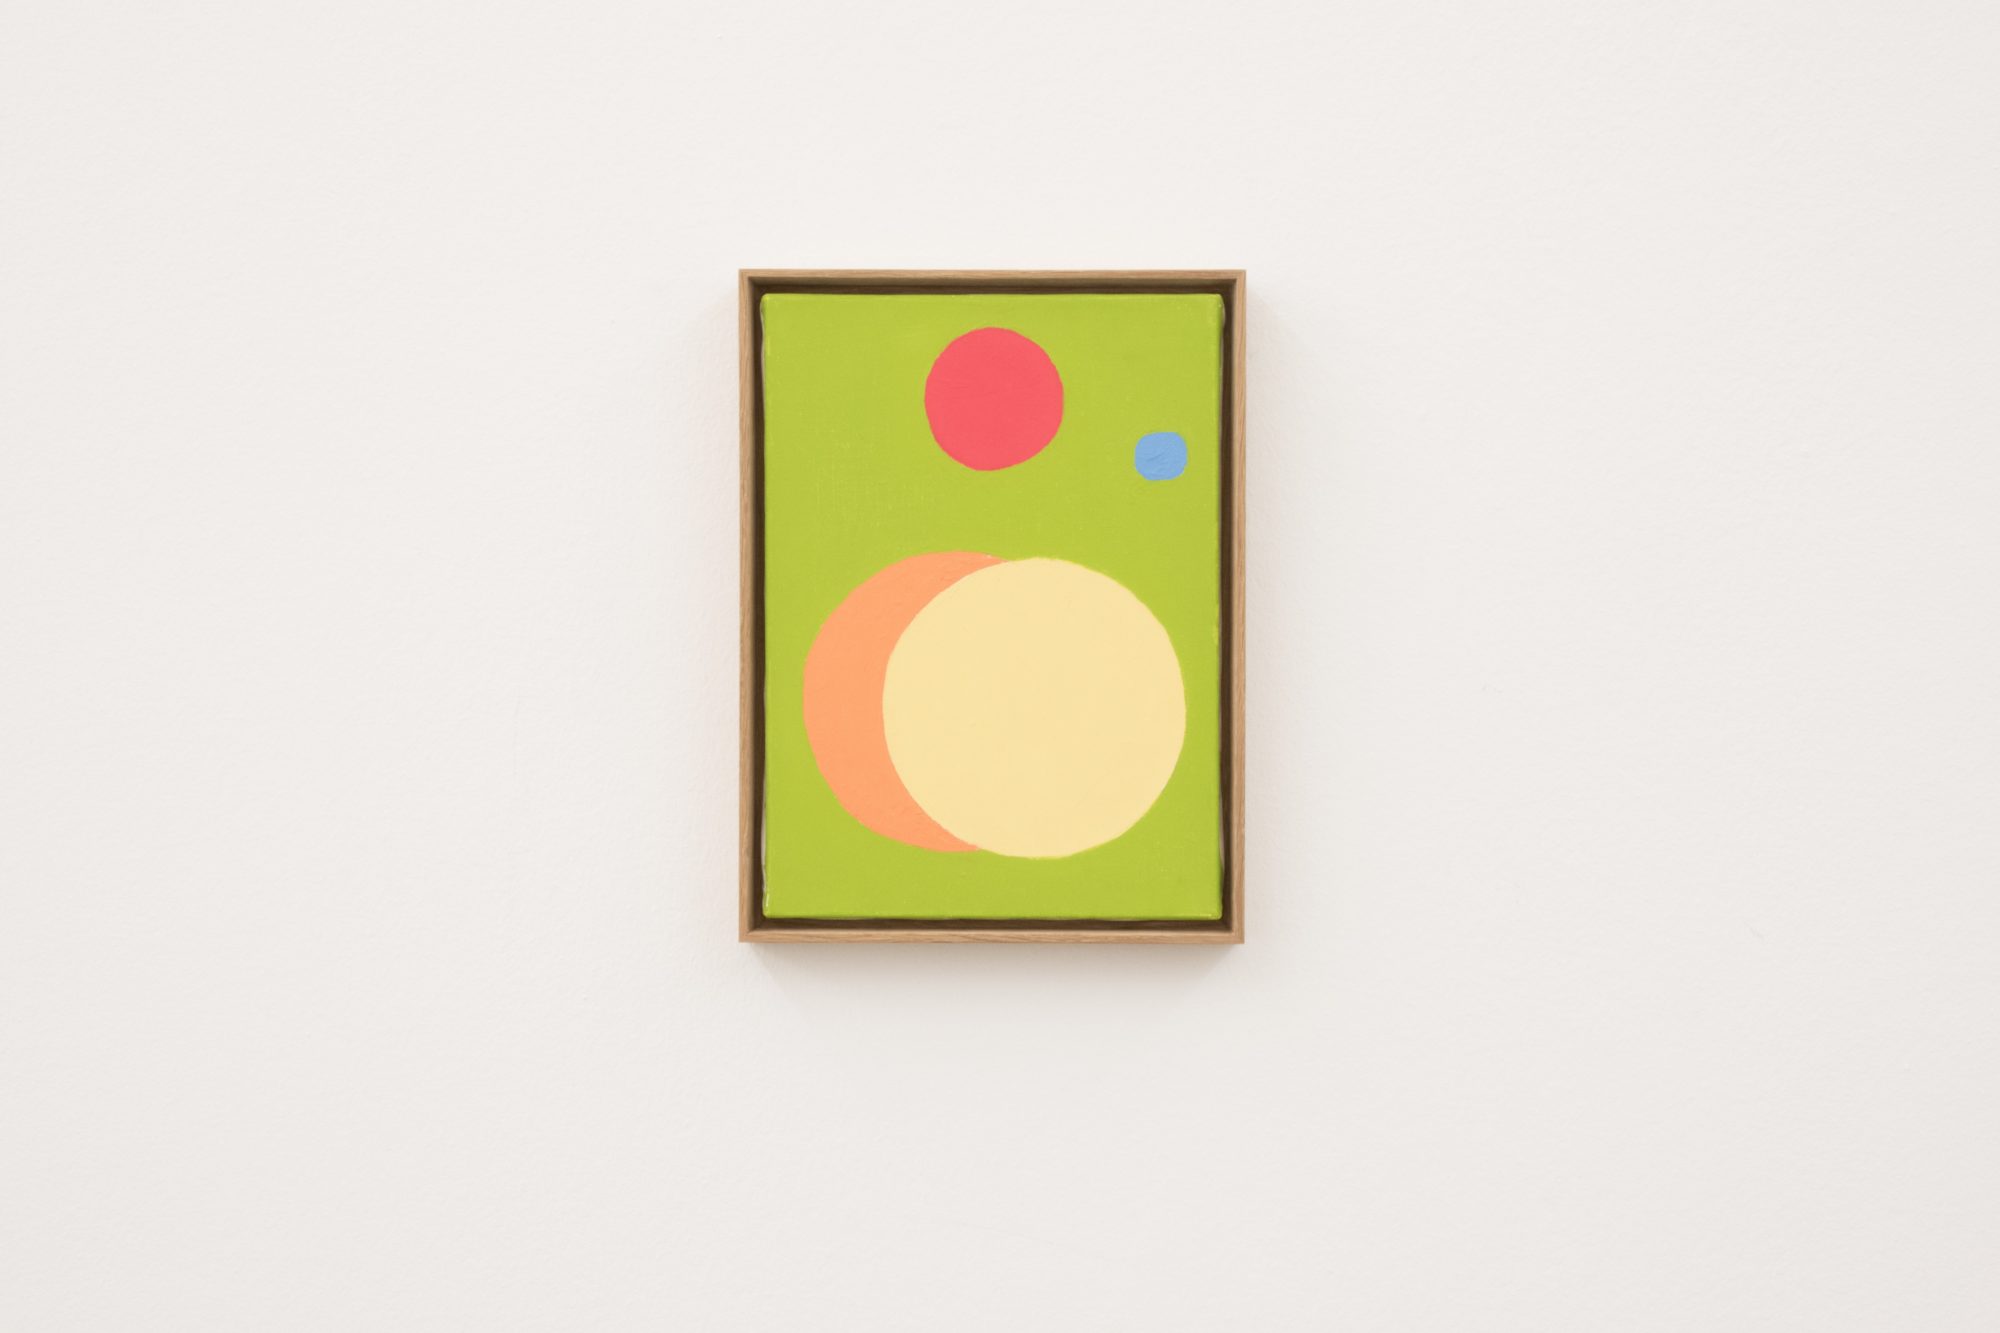 An abstract oil painting comprised of circles against a pear-green background.